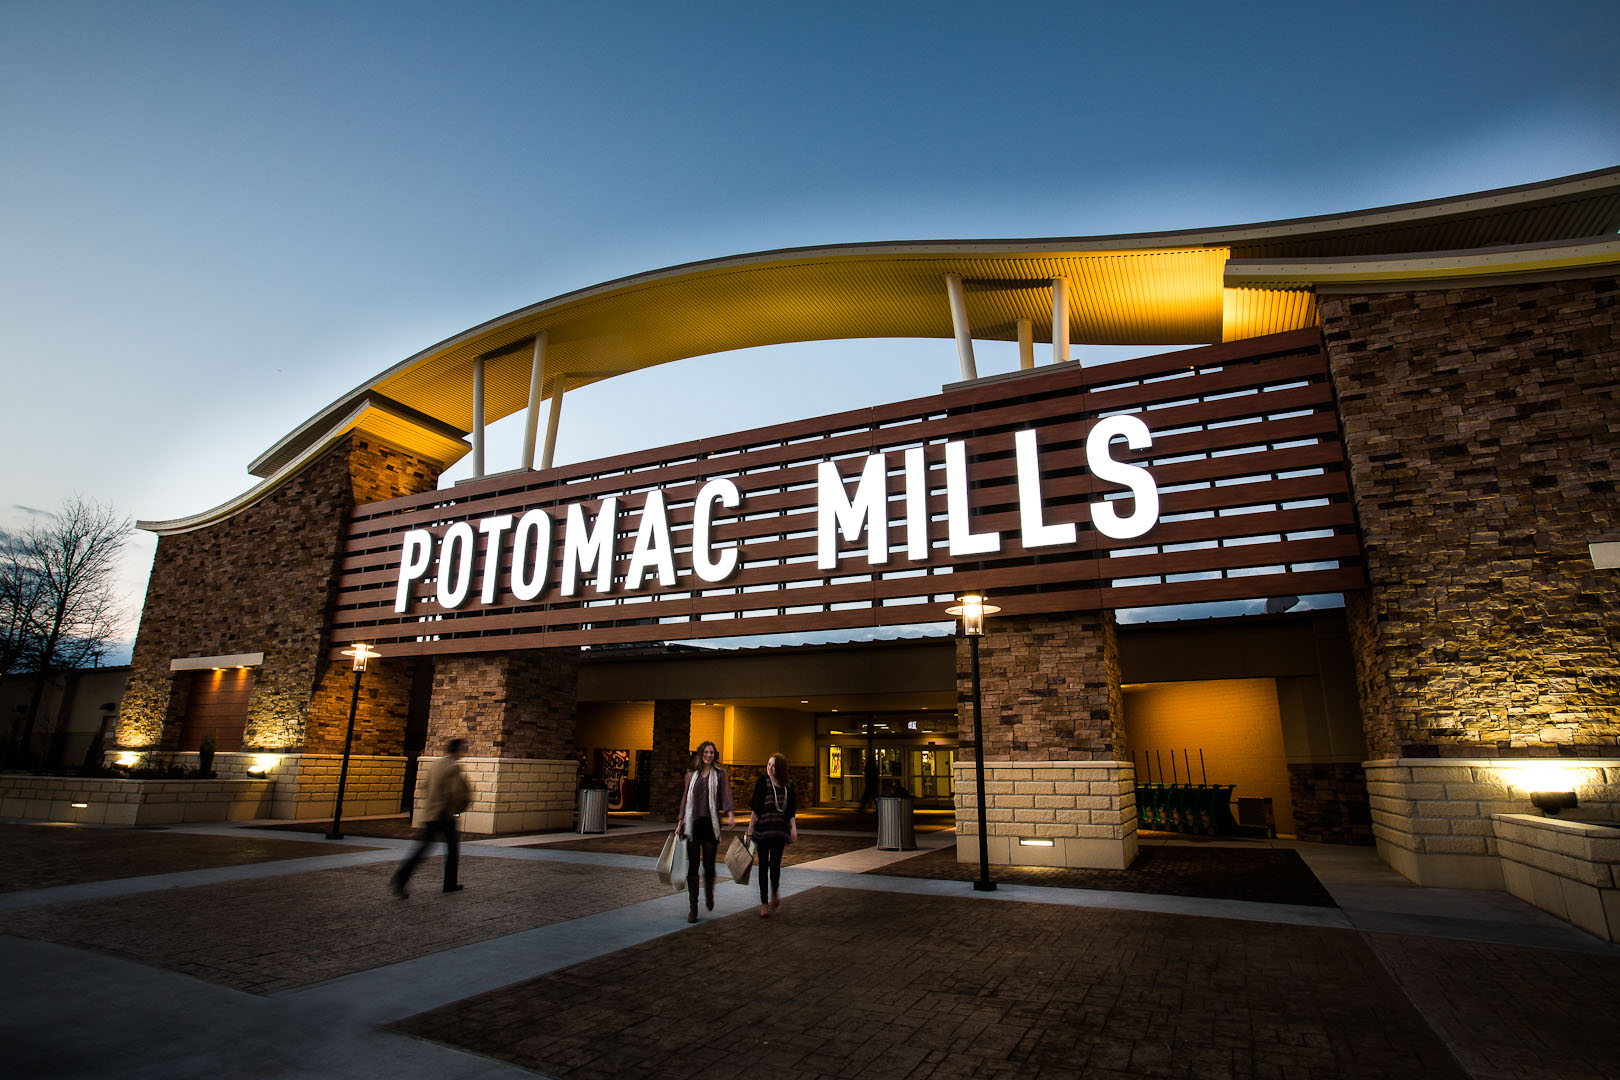 Potomac Mills - We are excited to have Pokerea at Potomac